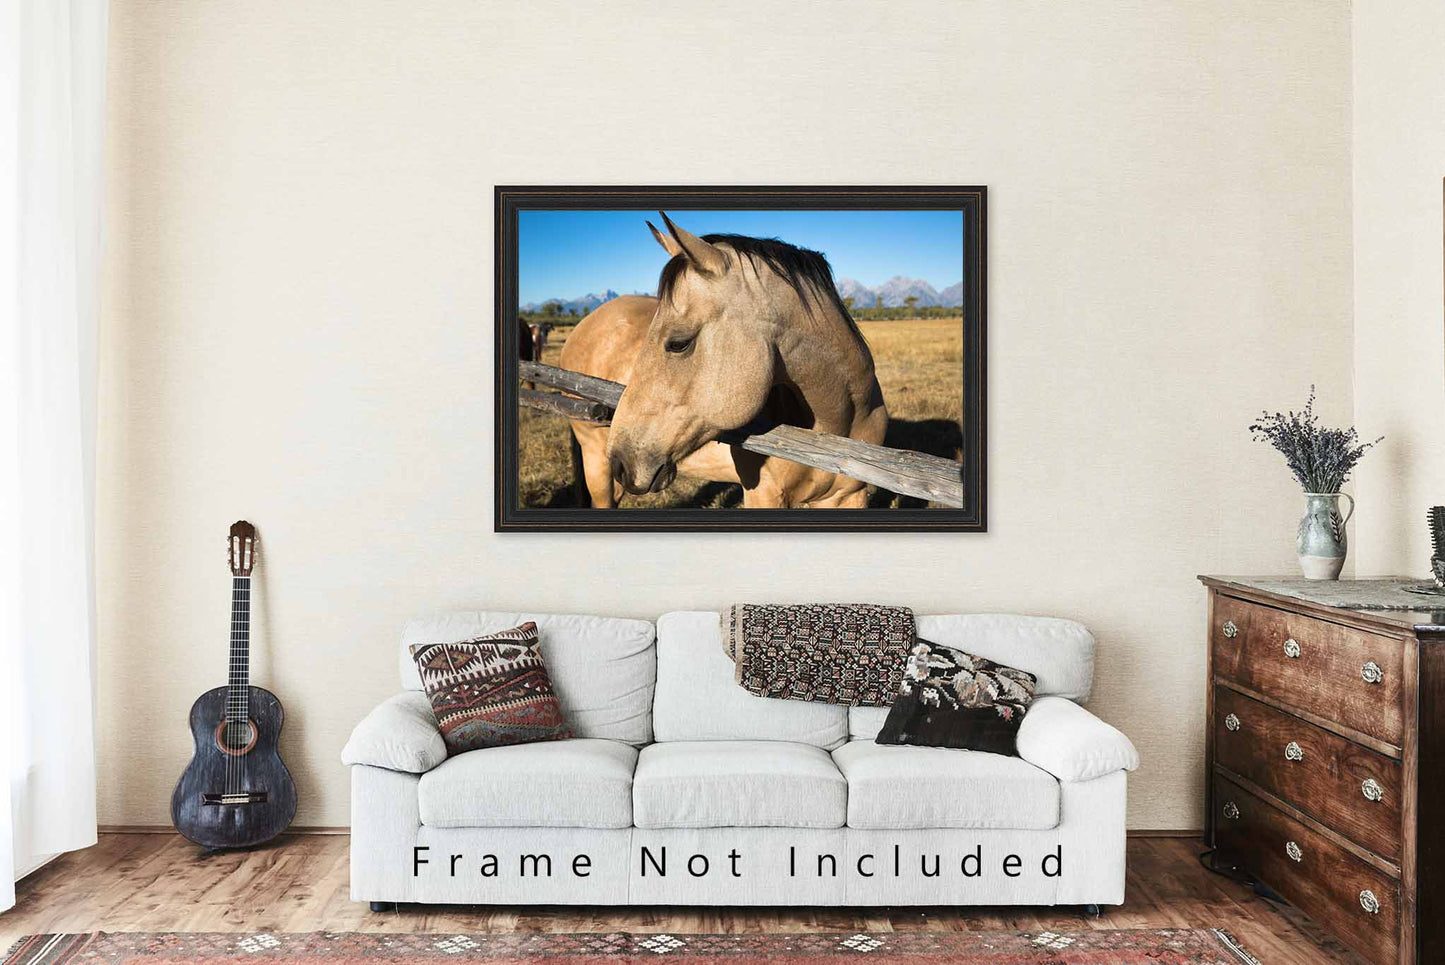 Horse Picture - Fine Art Equine Photography Print of Buckskin Horse in the Grand Tetons Western Wyoming Ranch Wall Art Animal Photo Decor